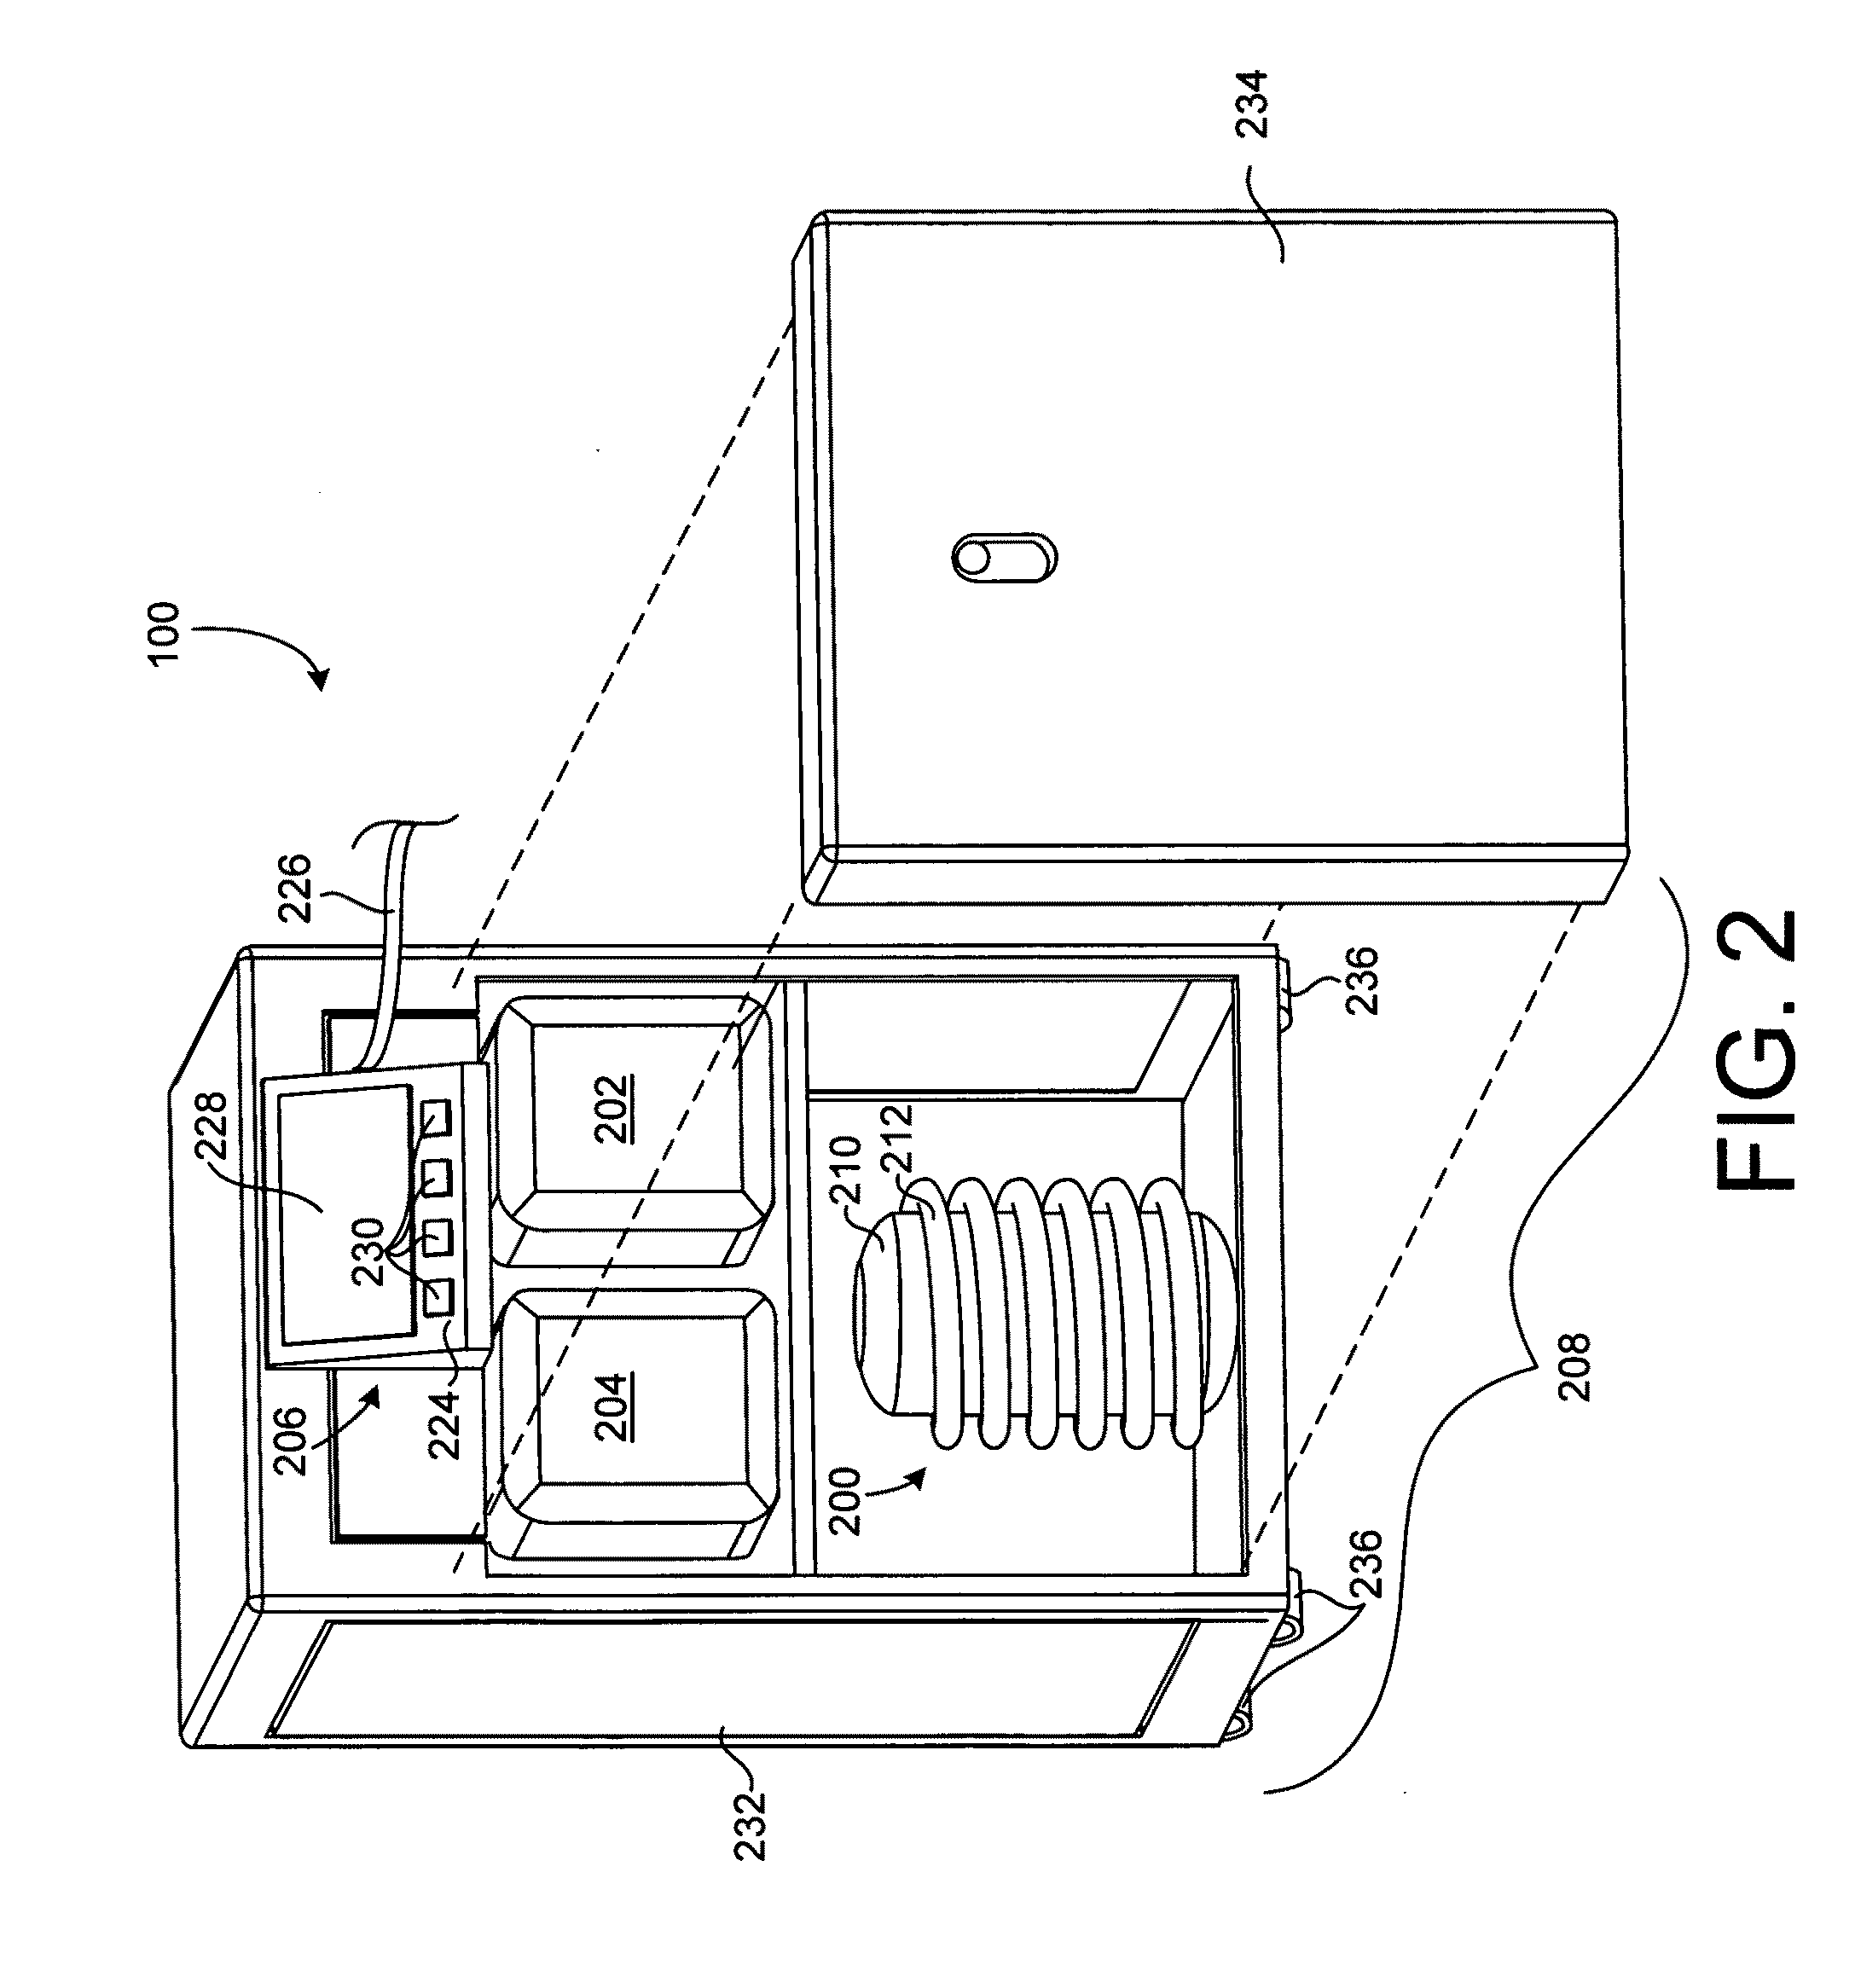 System and method for rapidly heating and cooling a mold